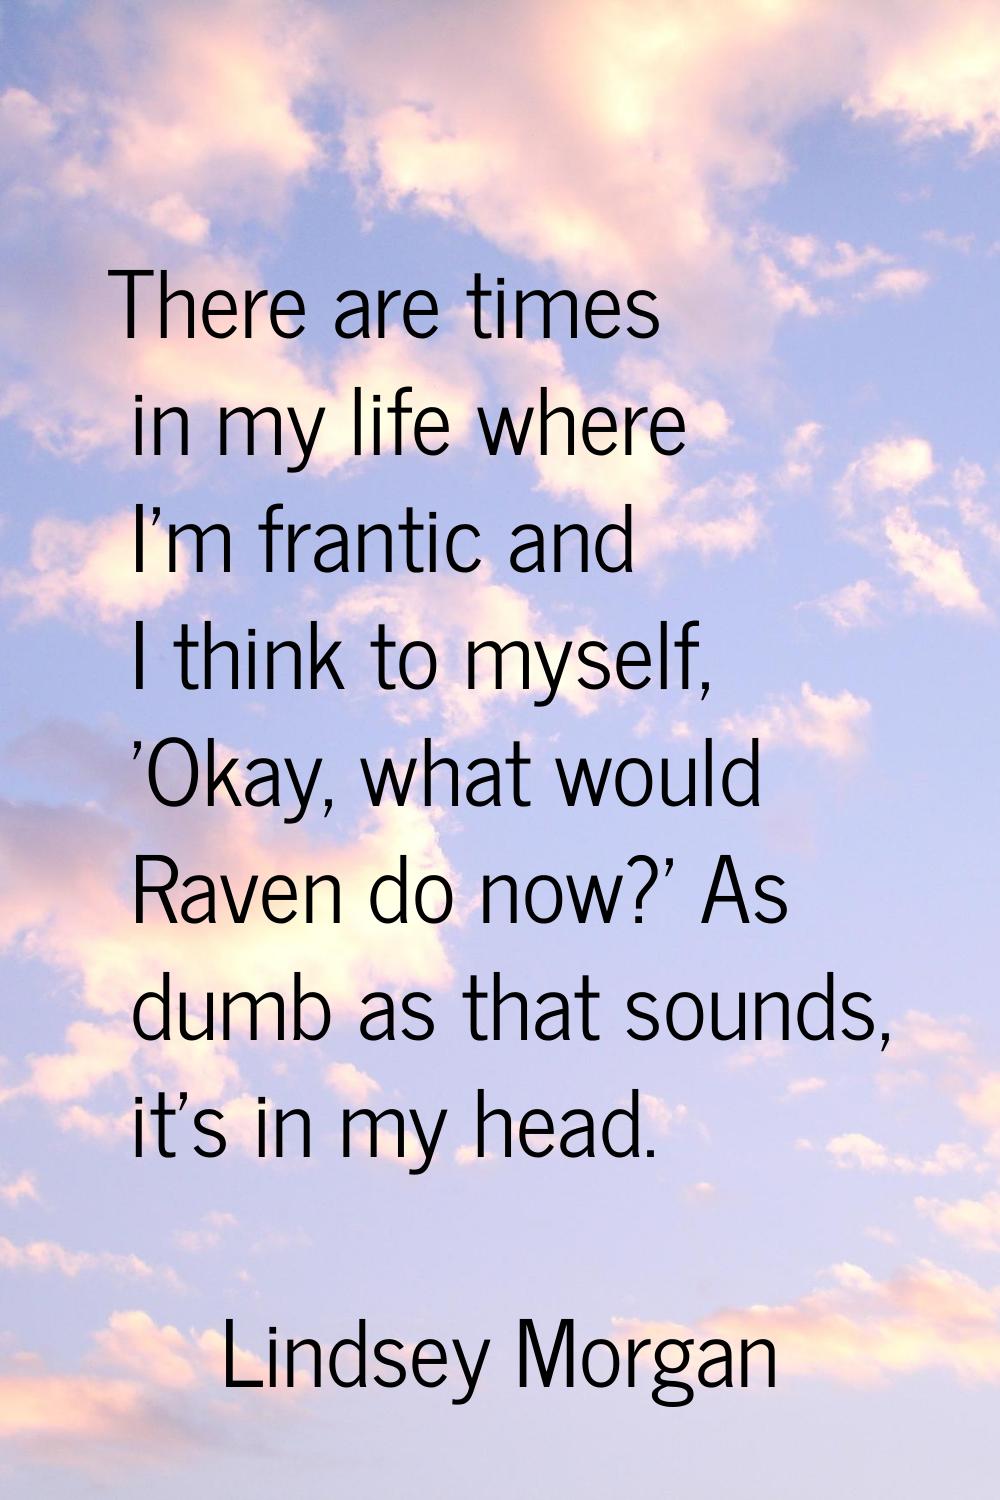 There are times in my life where I'm frantic and I think to myself, 'Okay, what would Raven do now?